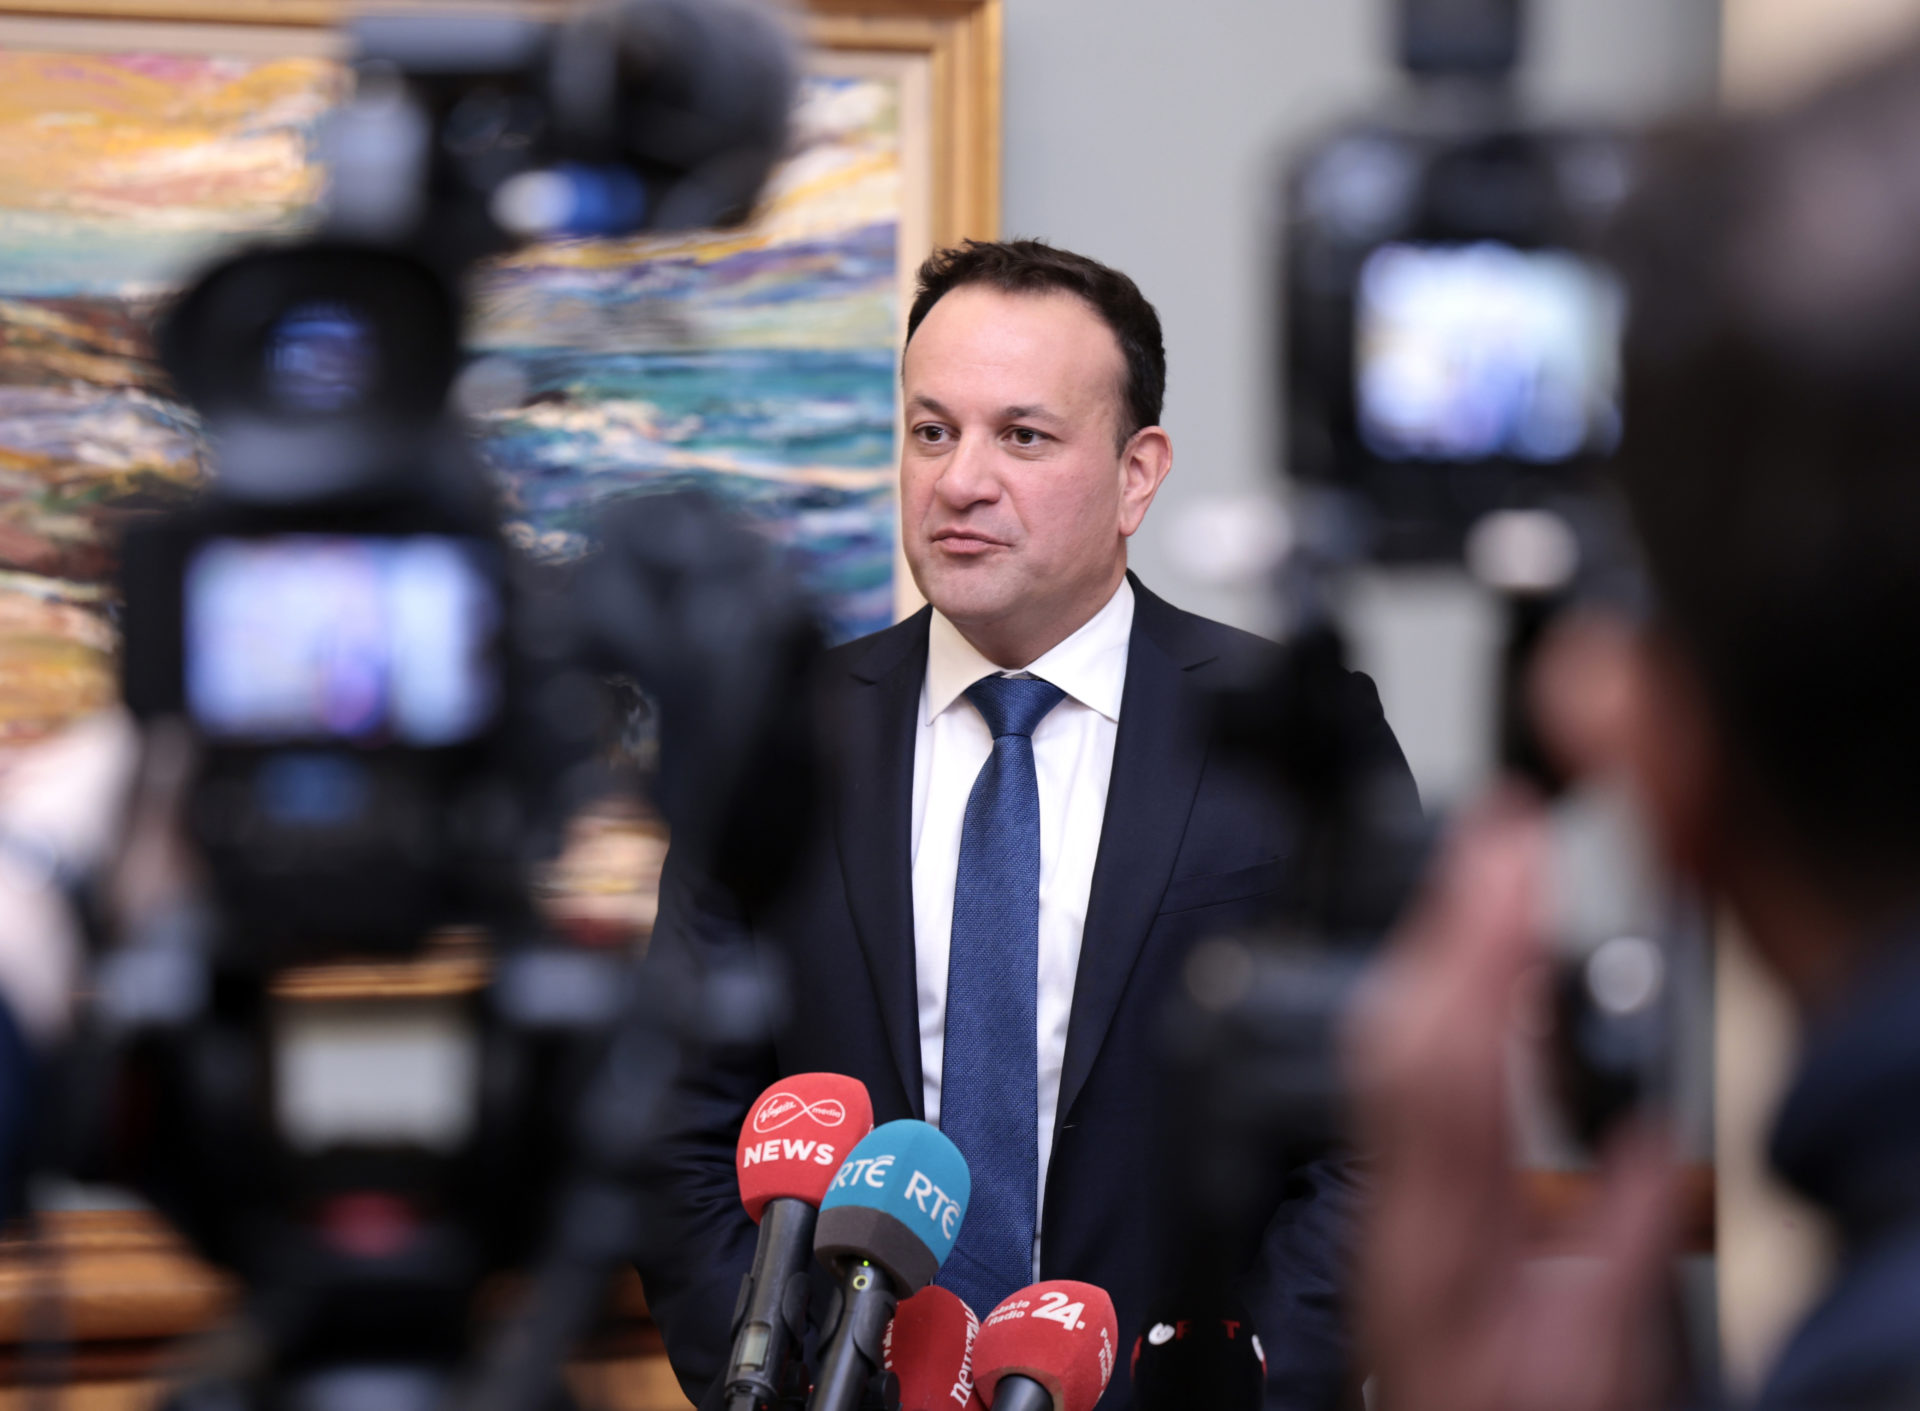 Taoiseach and Fine Gael leader Leo Varadkar speaking to the media at Dublin Castle for the referendum on family and care